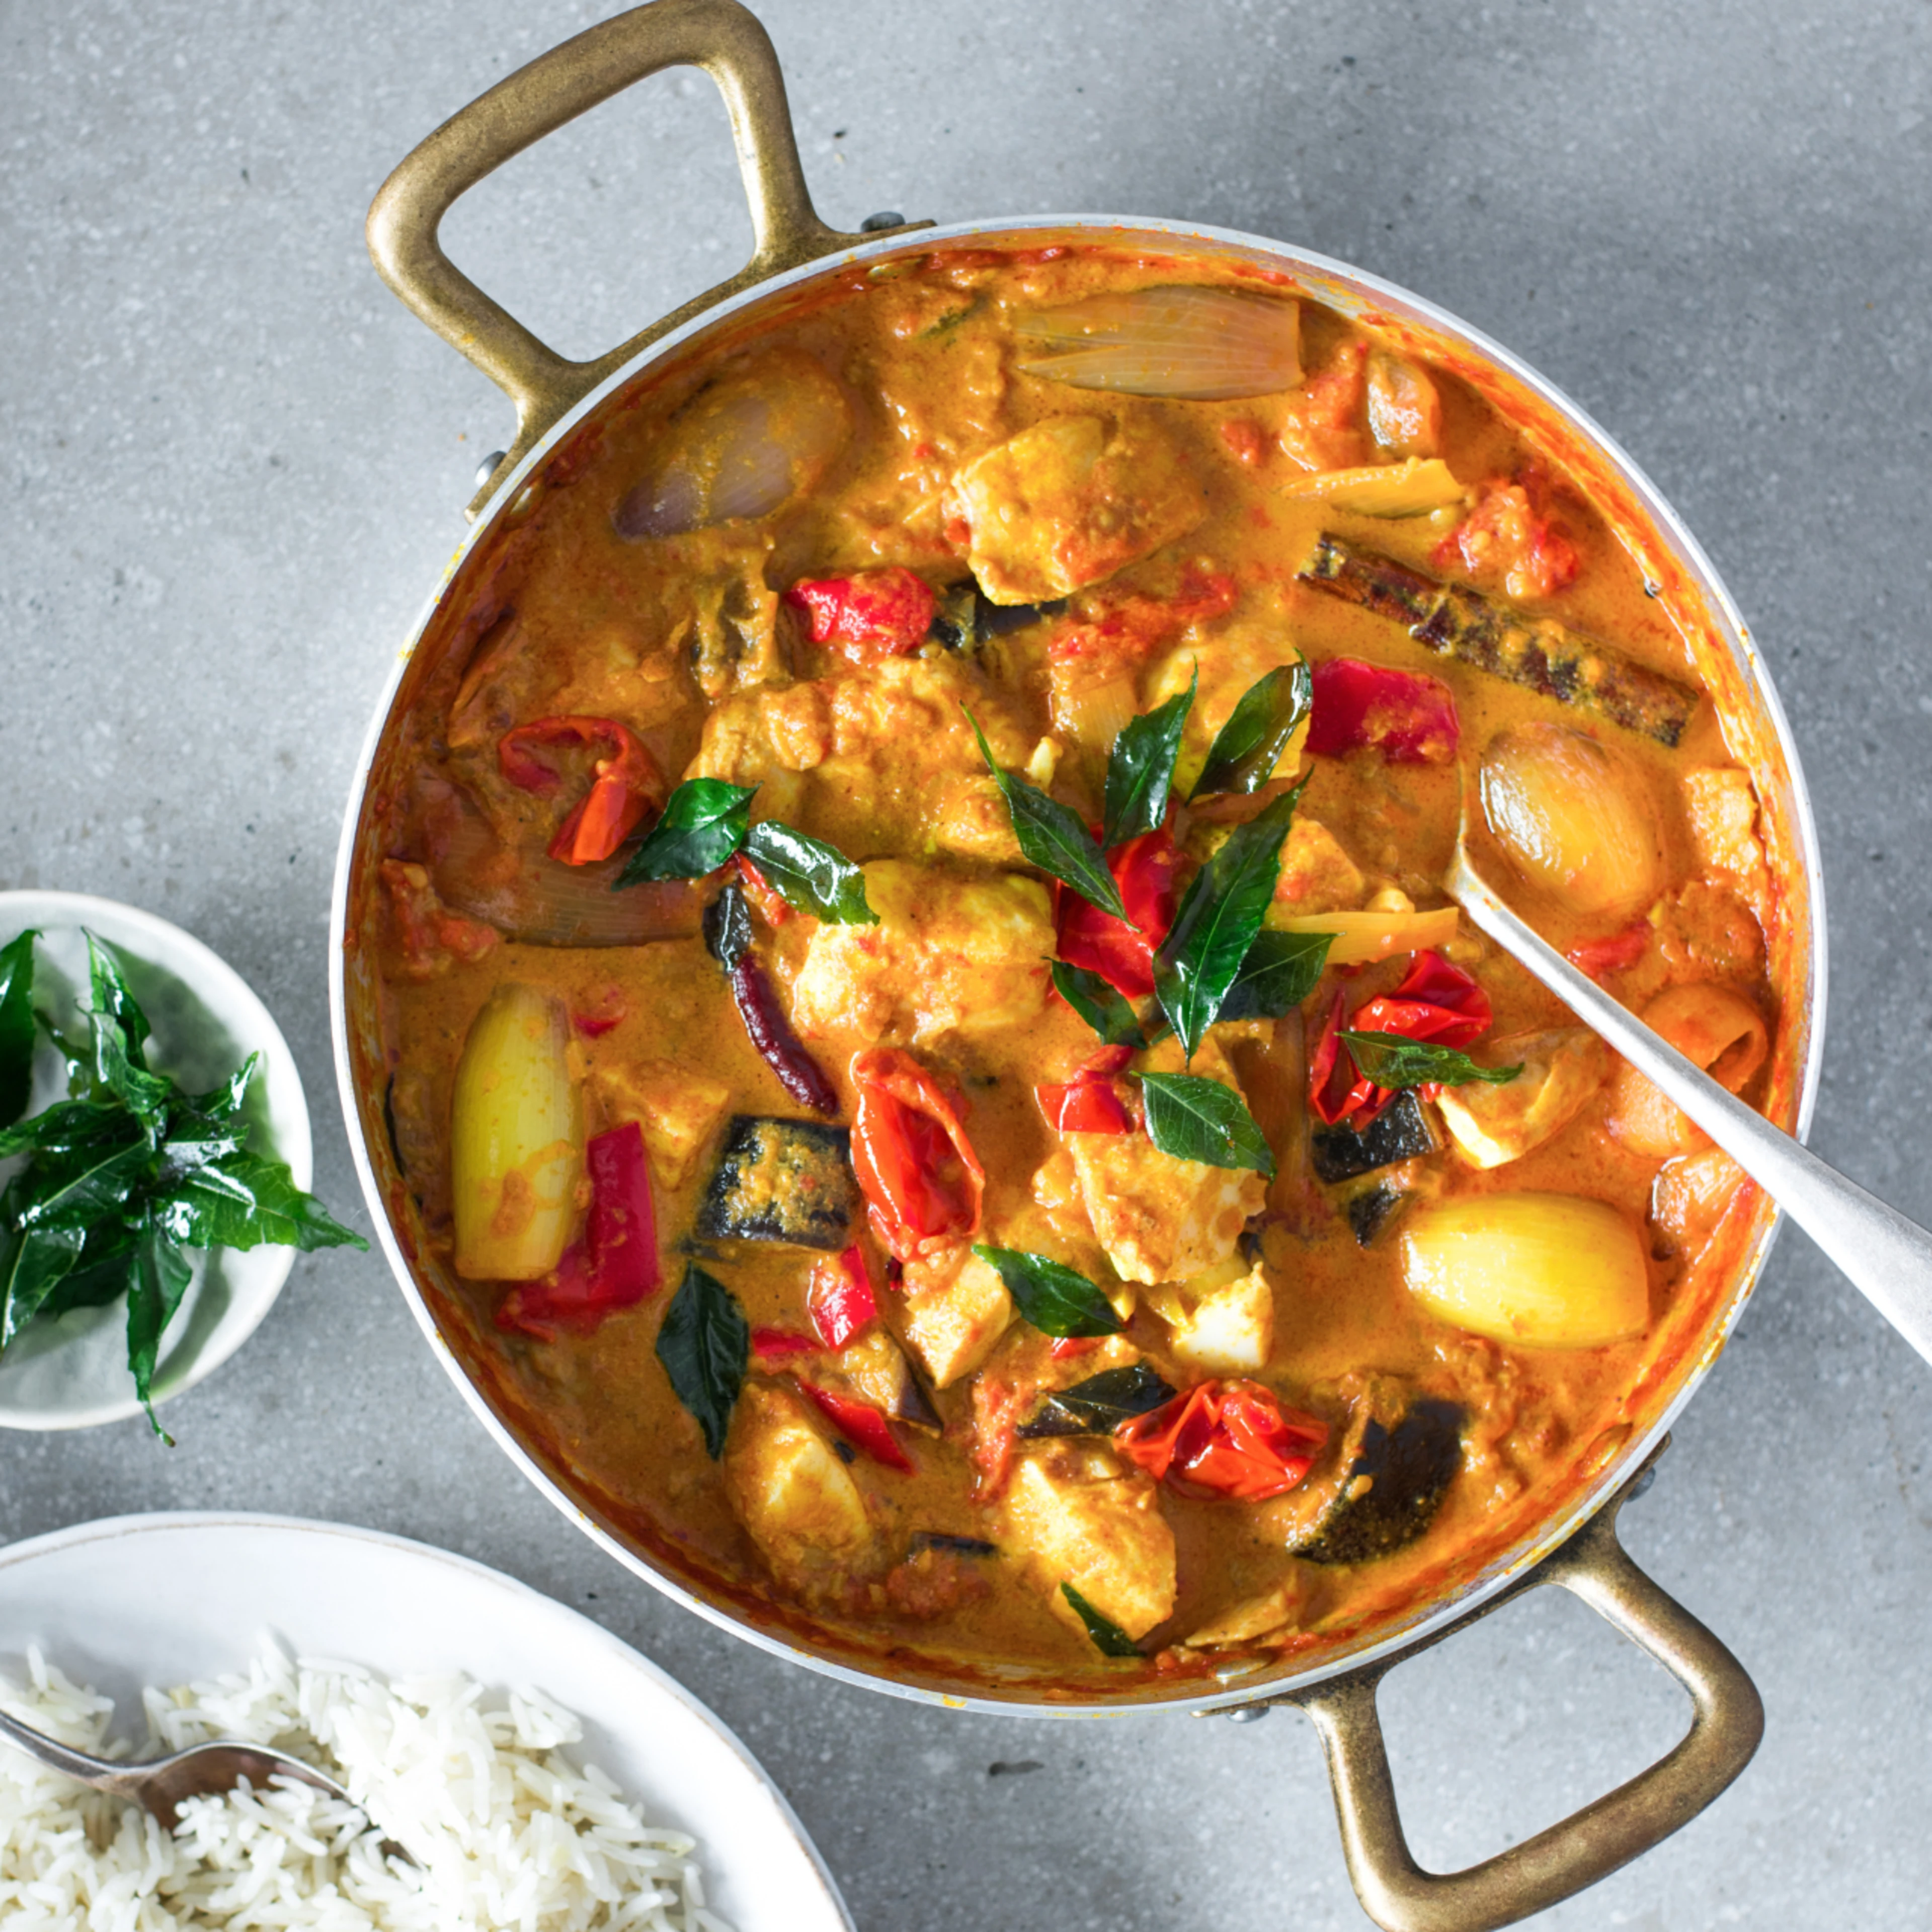 This vibrant curry will warm you up within moments. Served with fragrant coconut and ginger rice, this delicious dish is sure to become a staple in your home cooking repertoire.